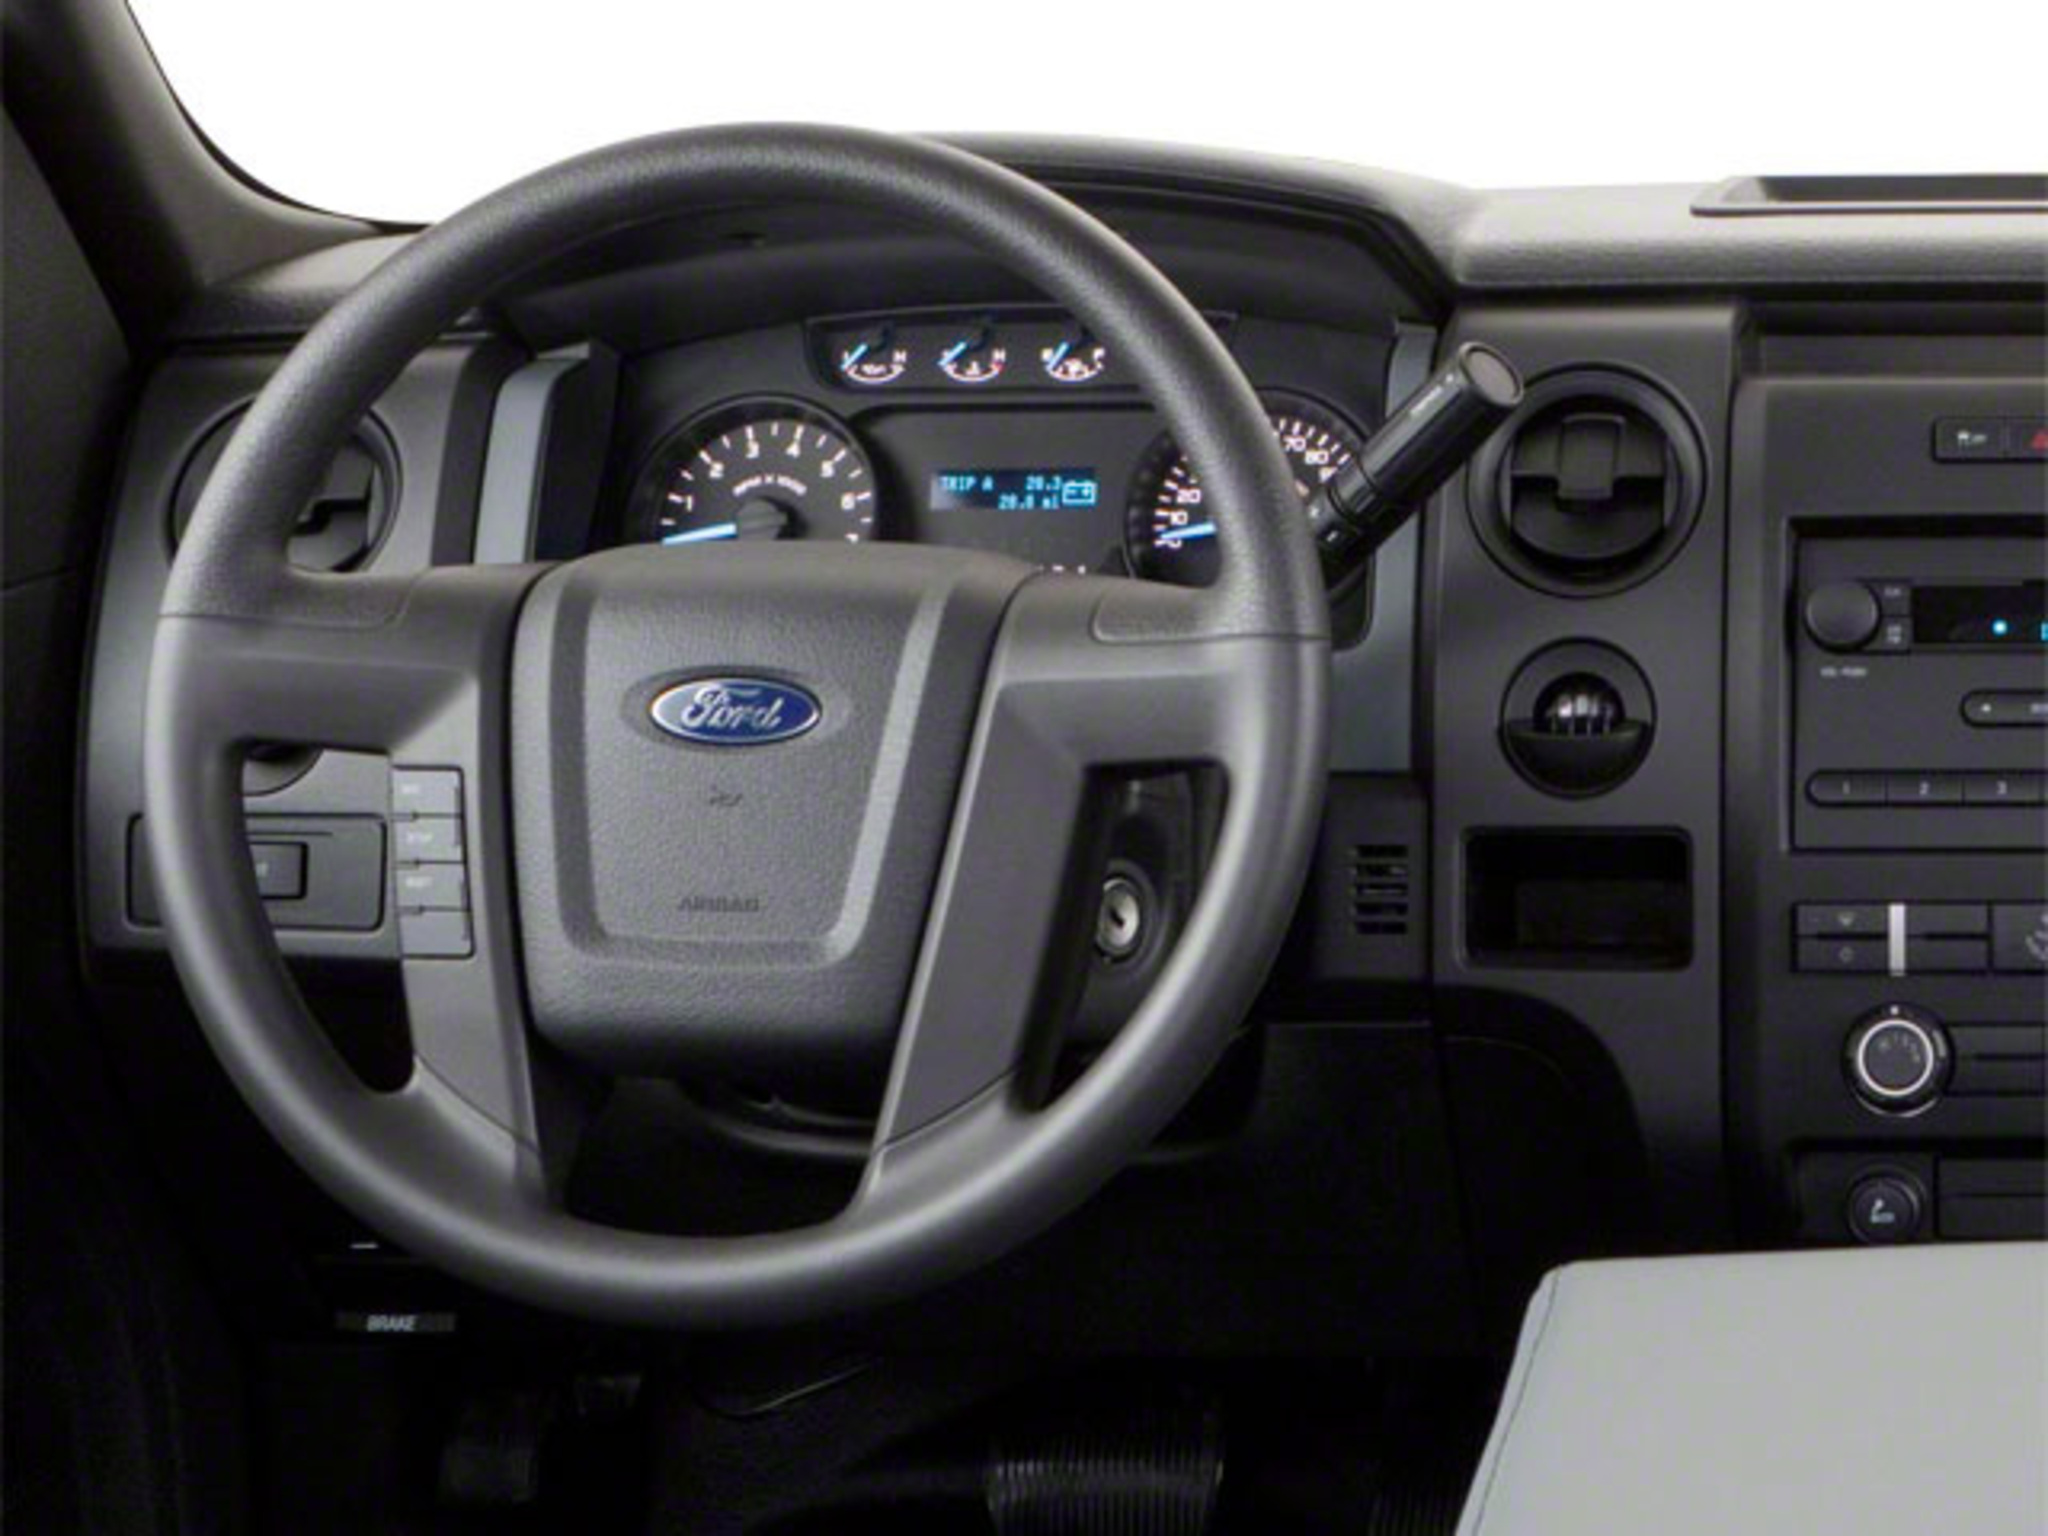 2010 Ford F 150 Compare Prices Trims Options Specs